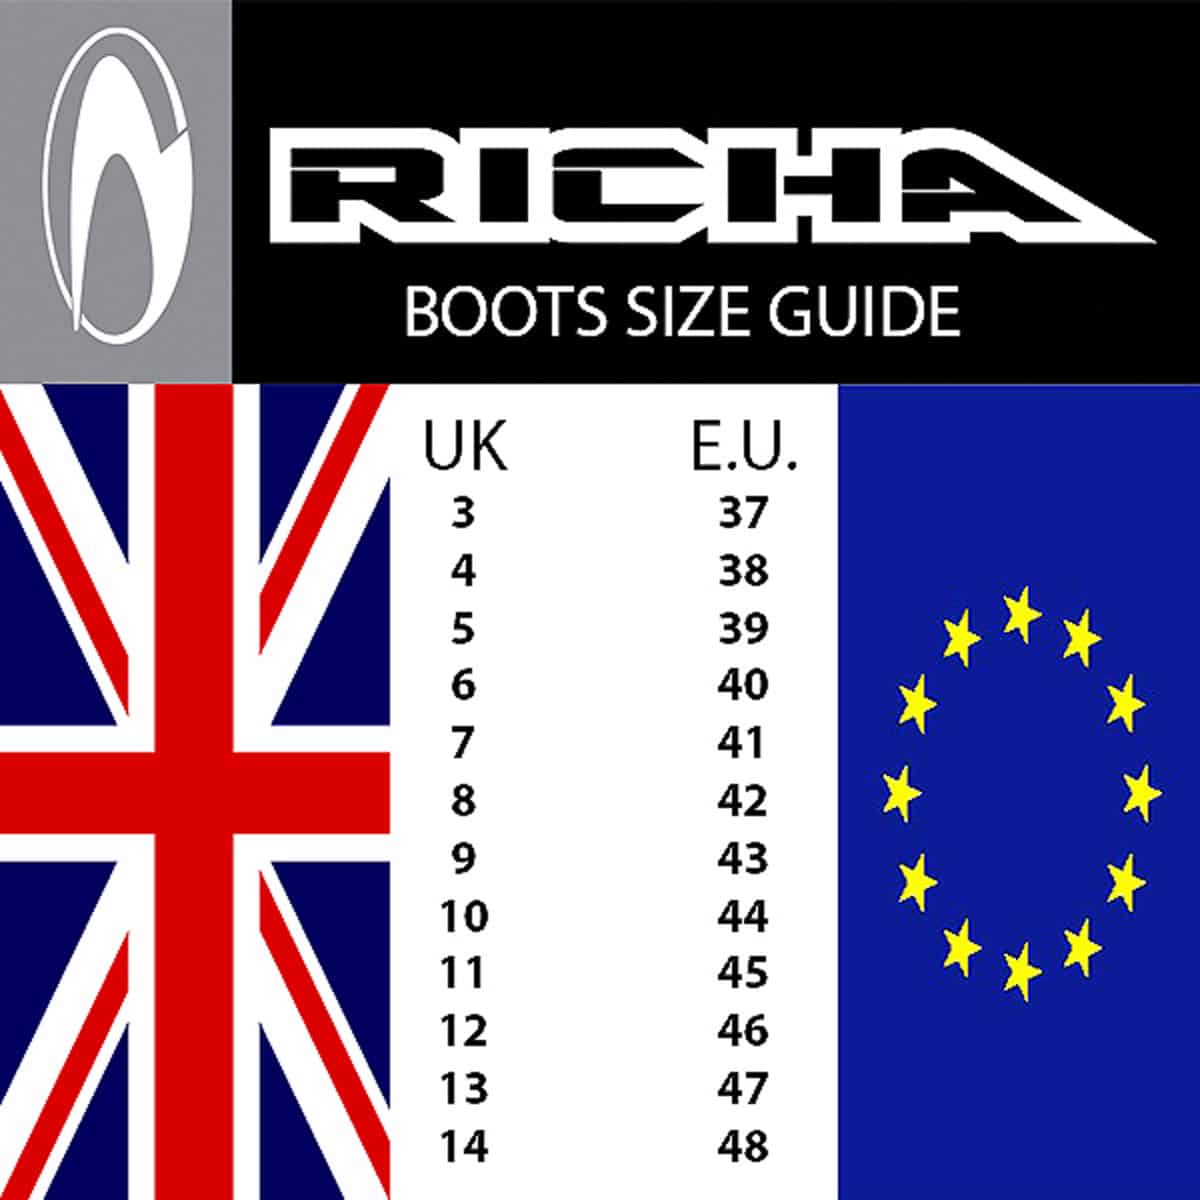 The Richa Slick boot is a perfect choice for those seeking urban chic without compromising safety. size guide